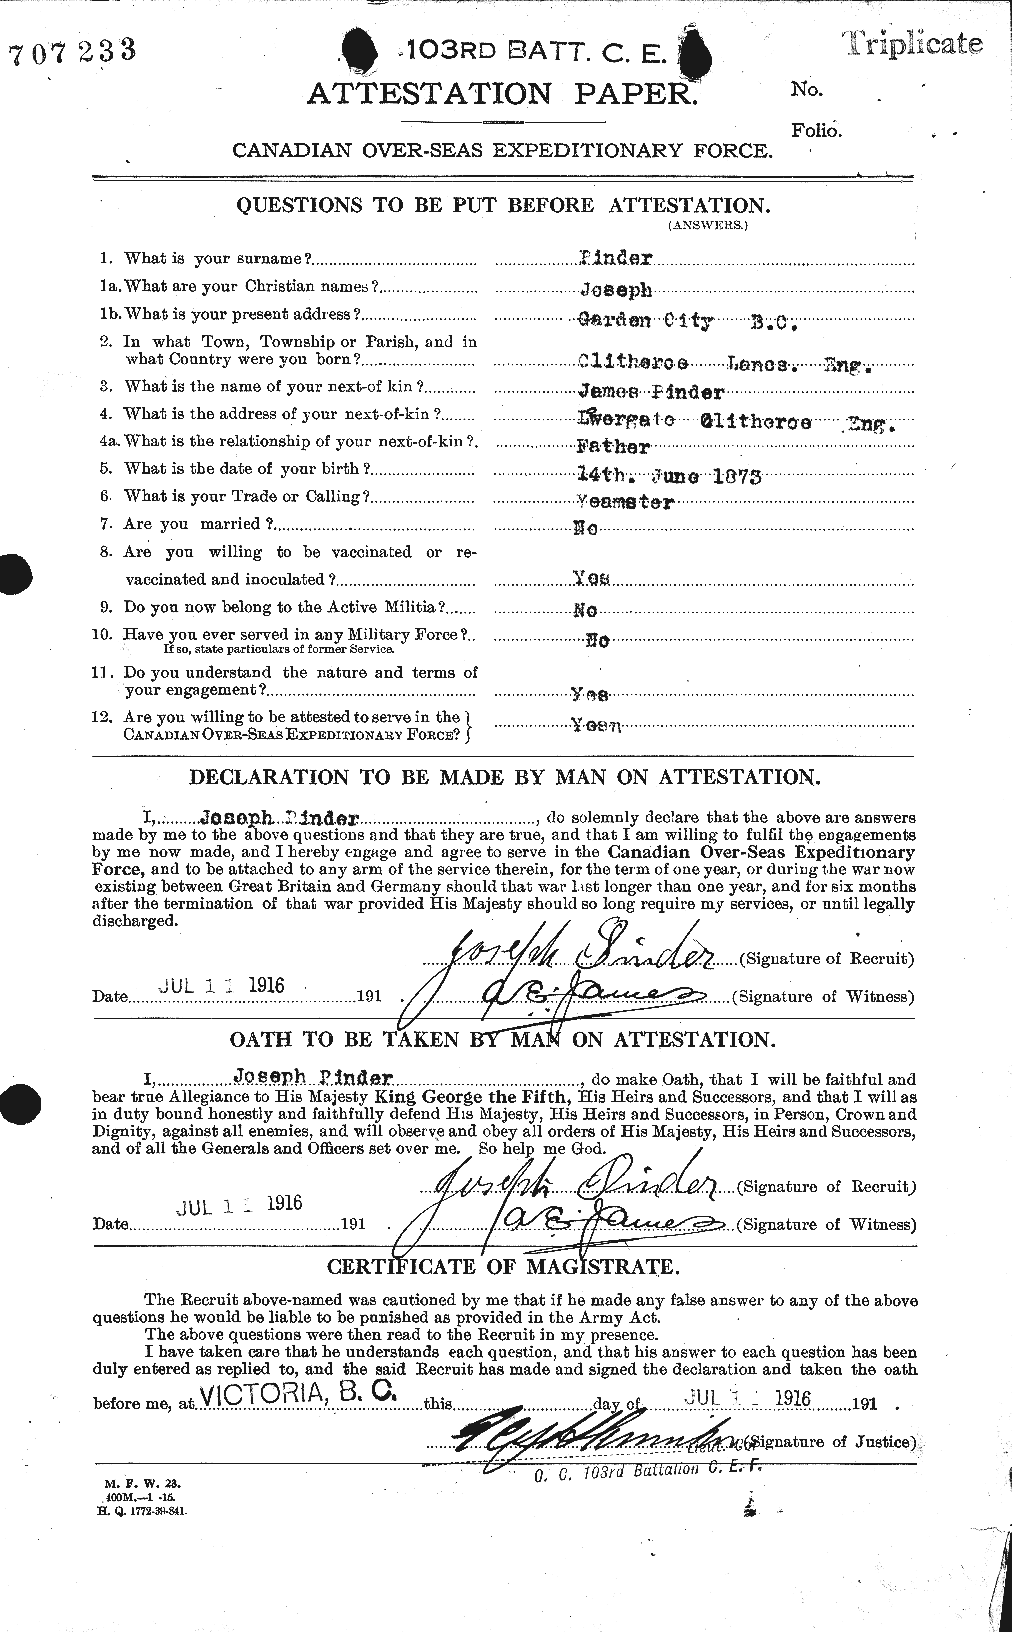 Personnel Records of the First World War - CEF 582480a